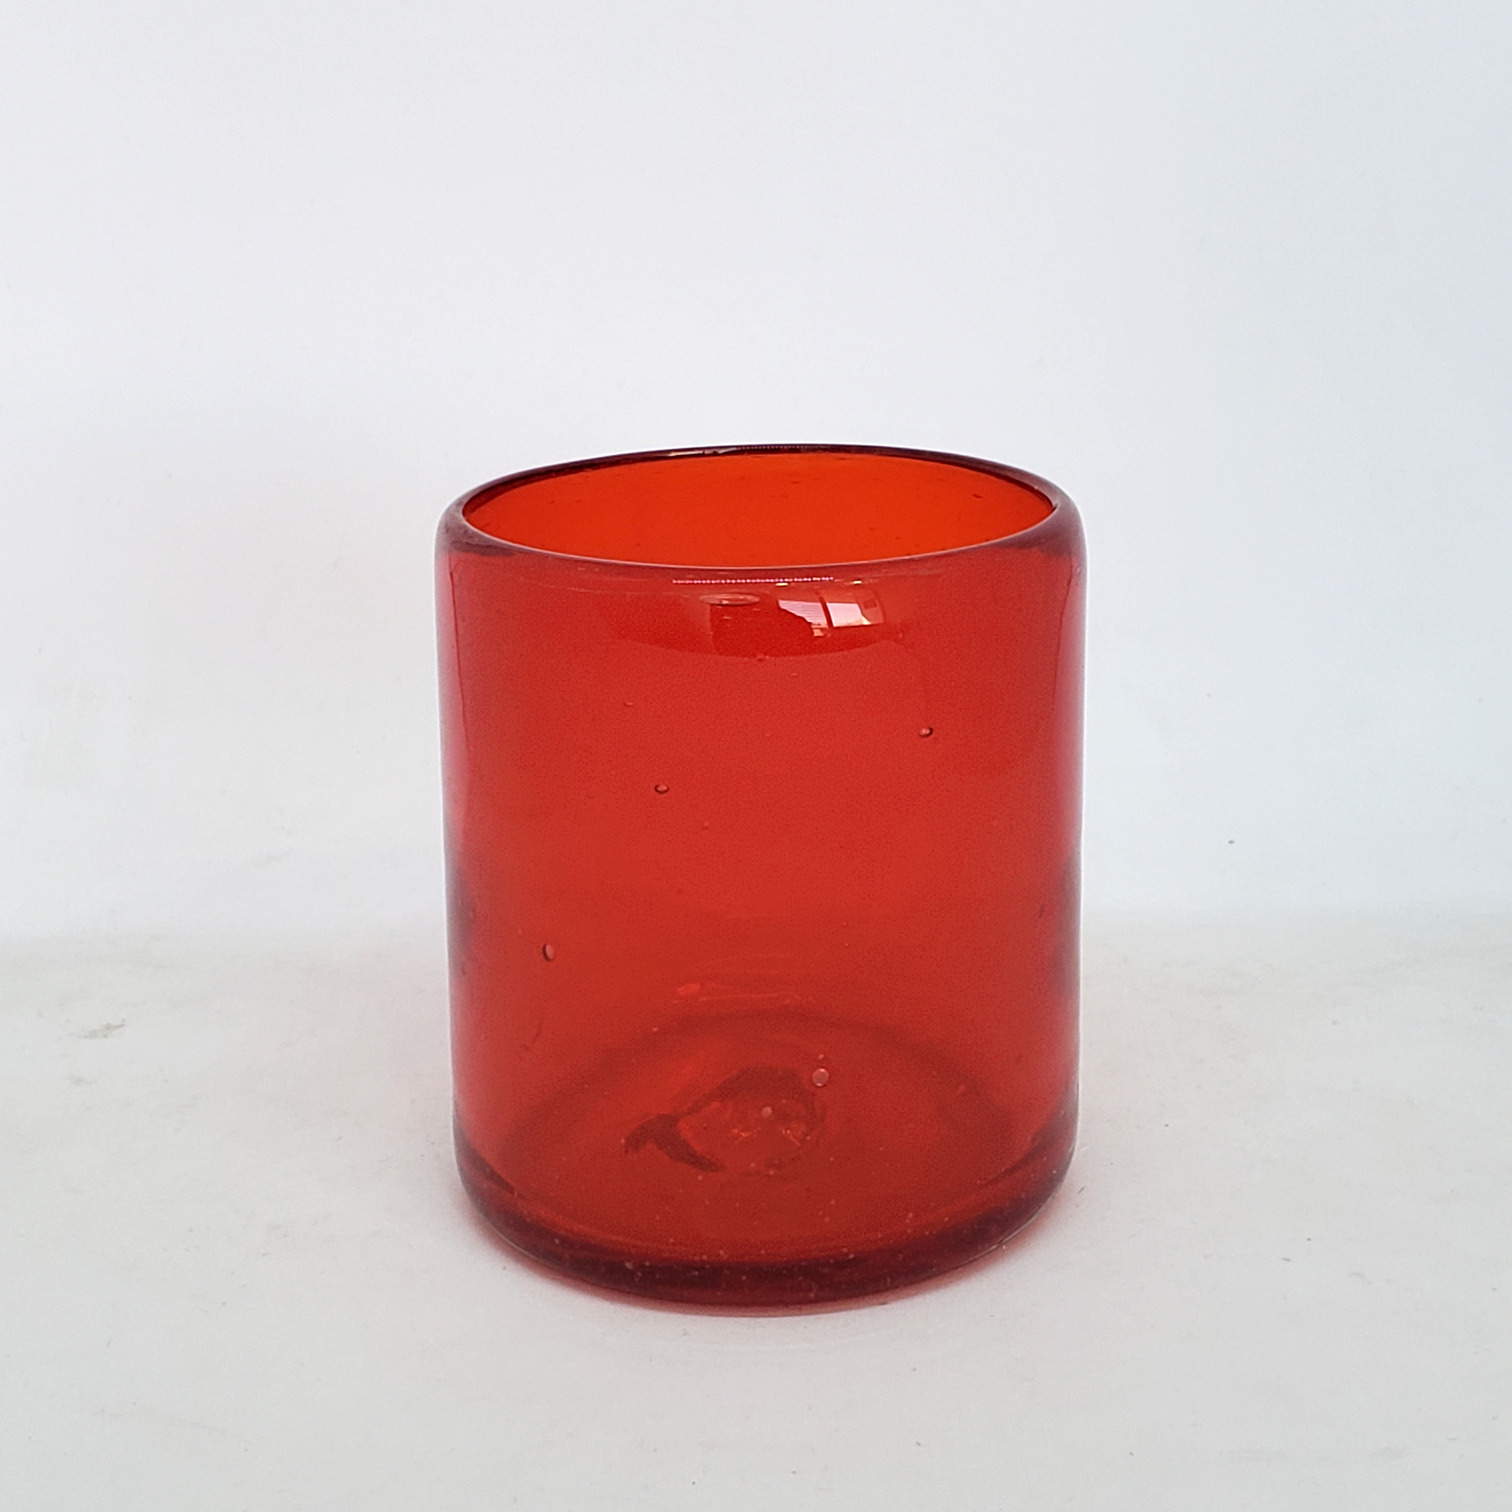 MEXICAN GLASSWARE / Solid Ruby Red 9 oz Short Tumblers (set of 6) / Enhance your favorite drink with these colorful handcrafted glasses.